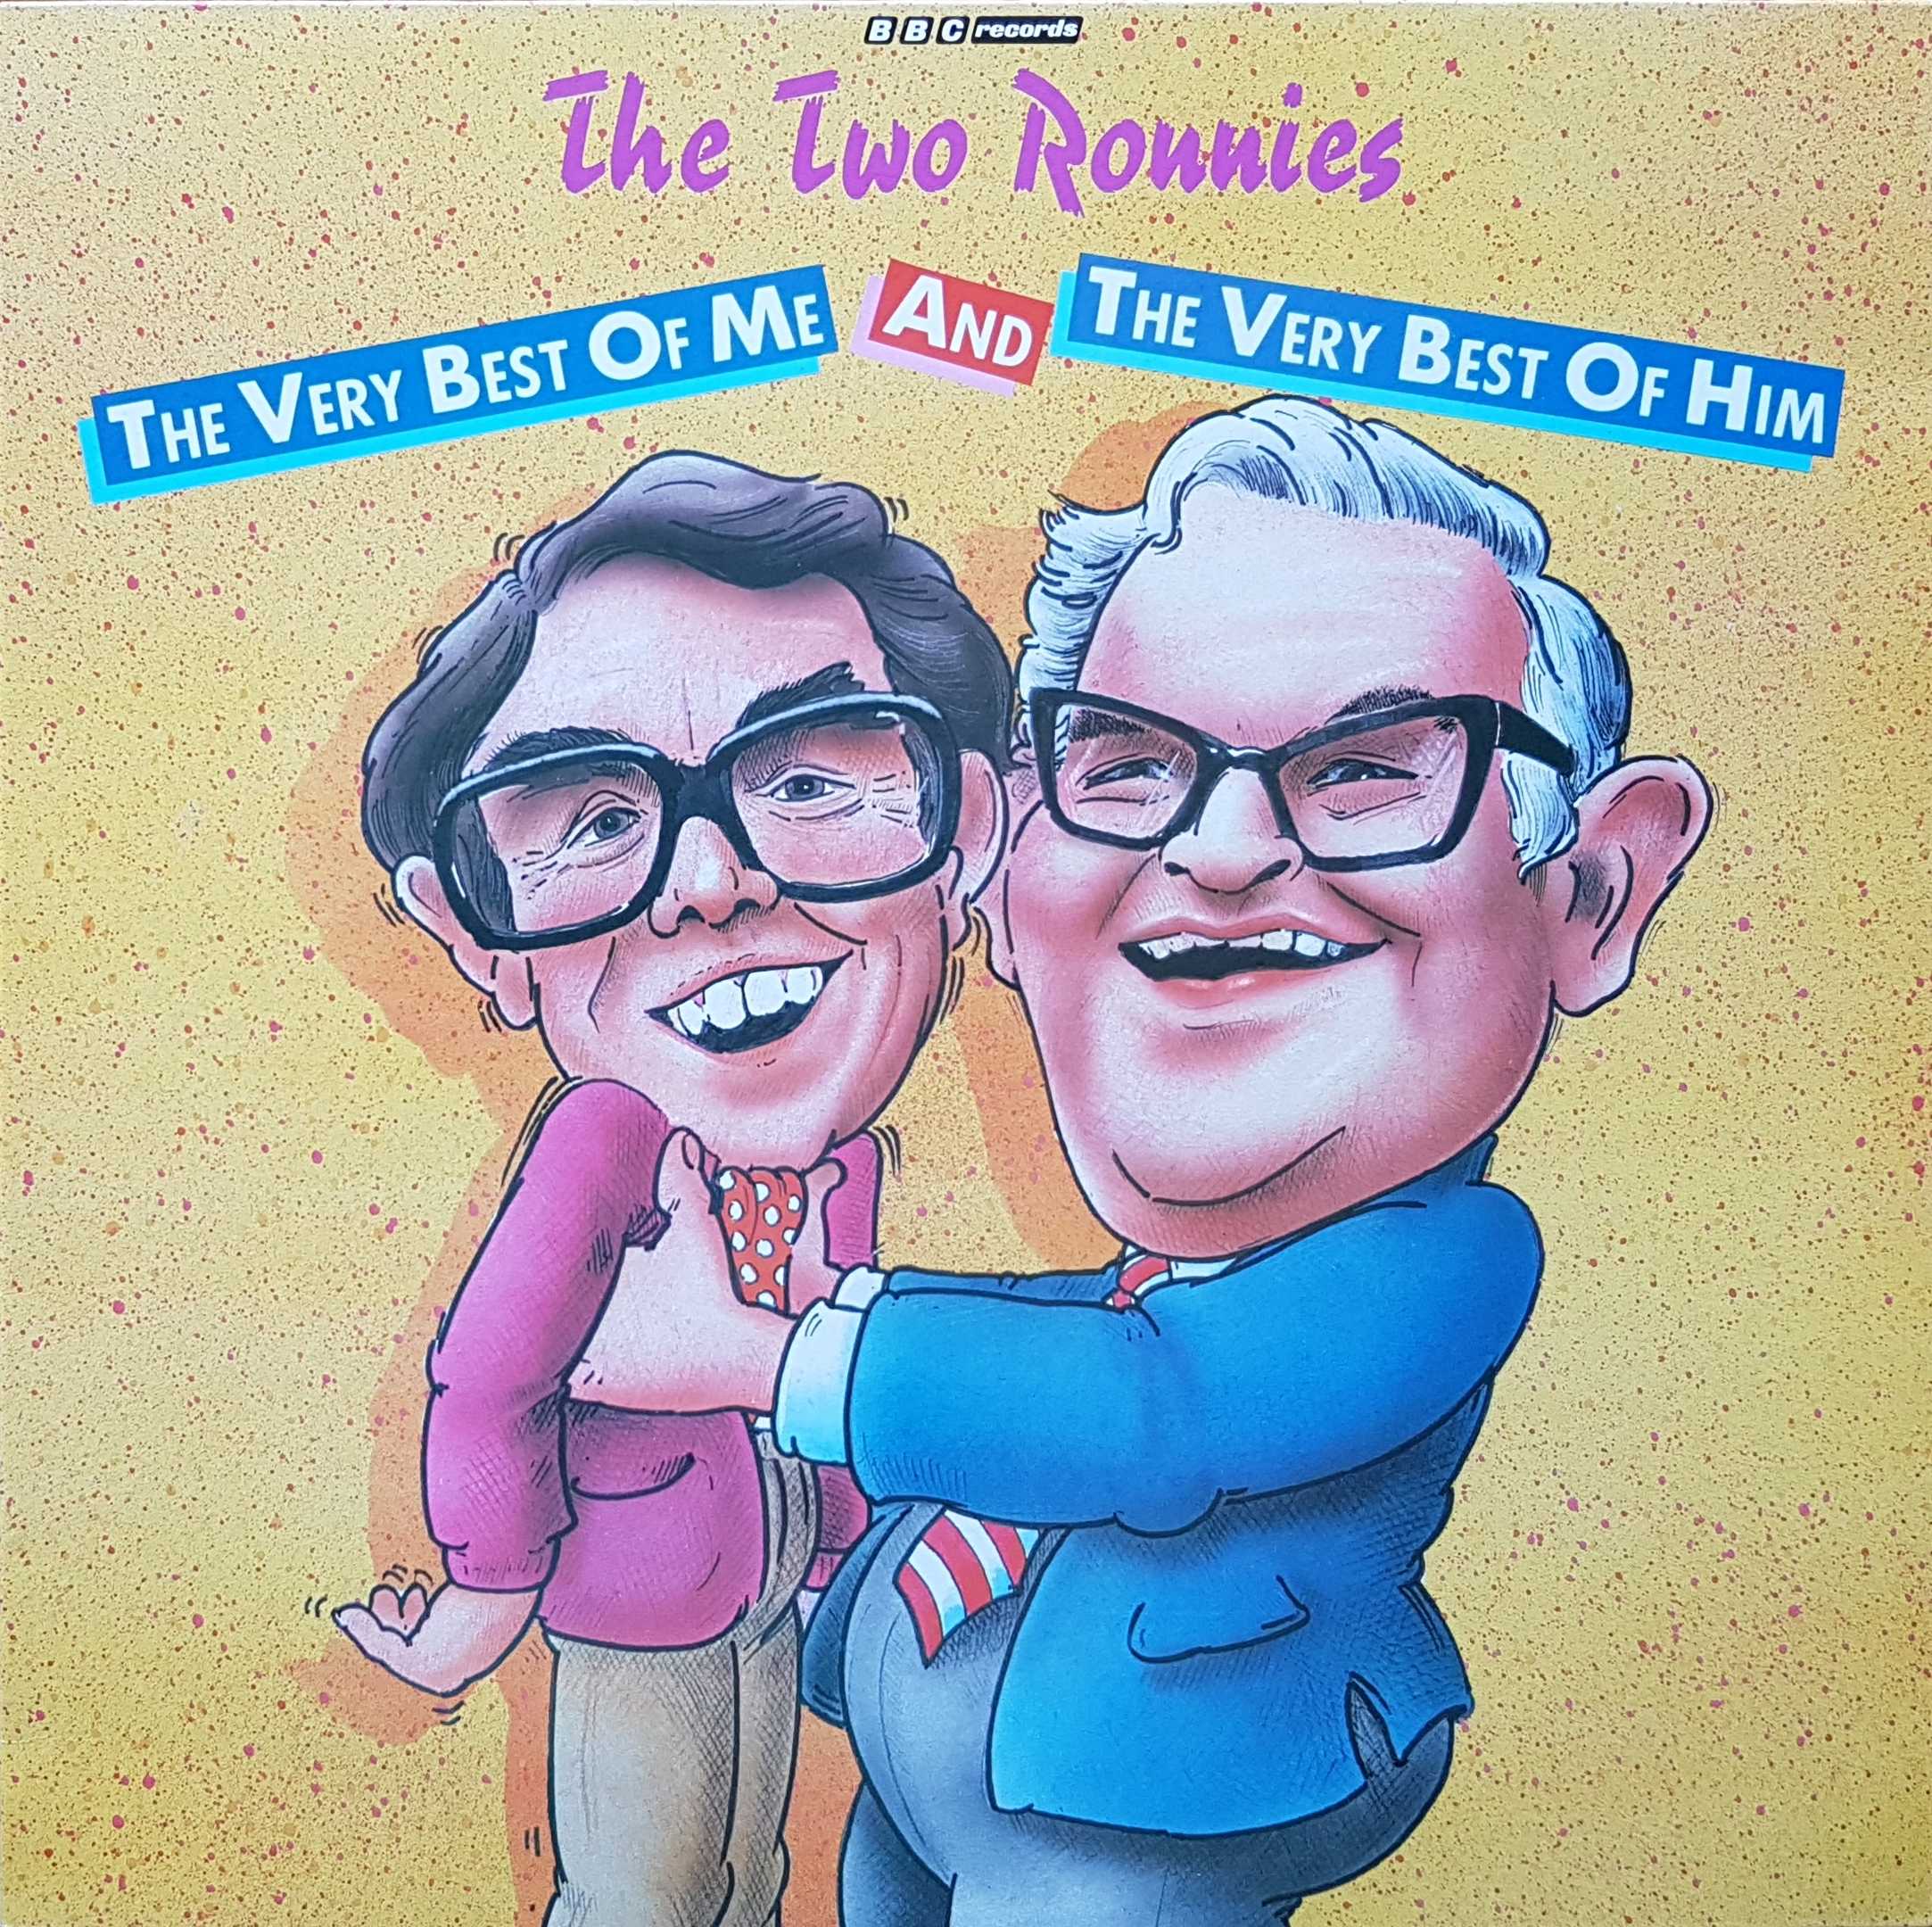 Picture of REC 514 The very best of me and the very best of him by artist Ronnie Corbett / Ronnie Barker from the BBC albums - Records and Tapes library